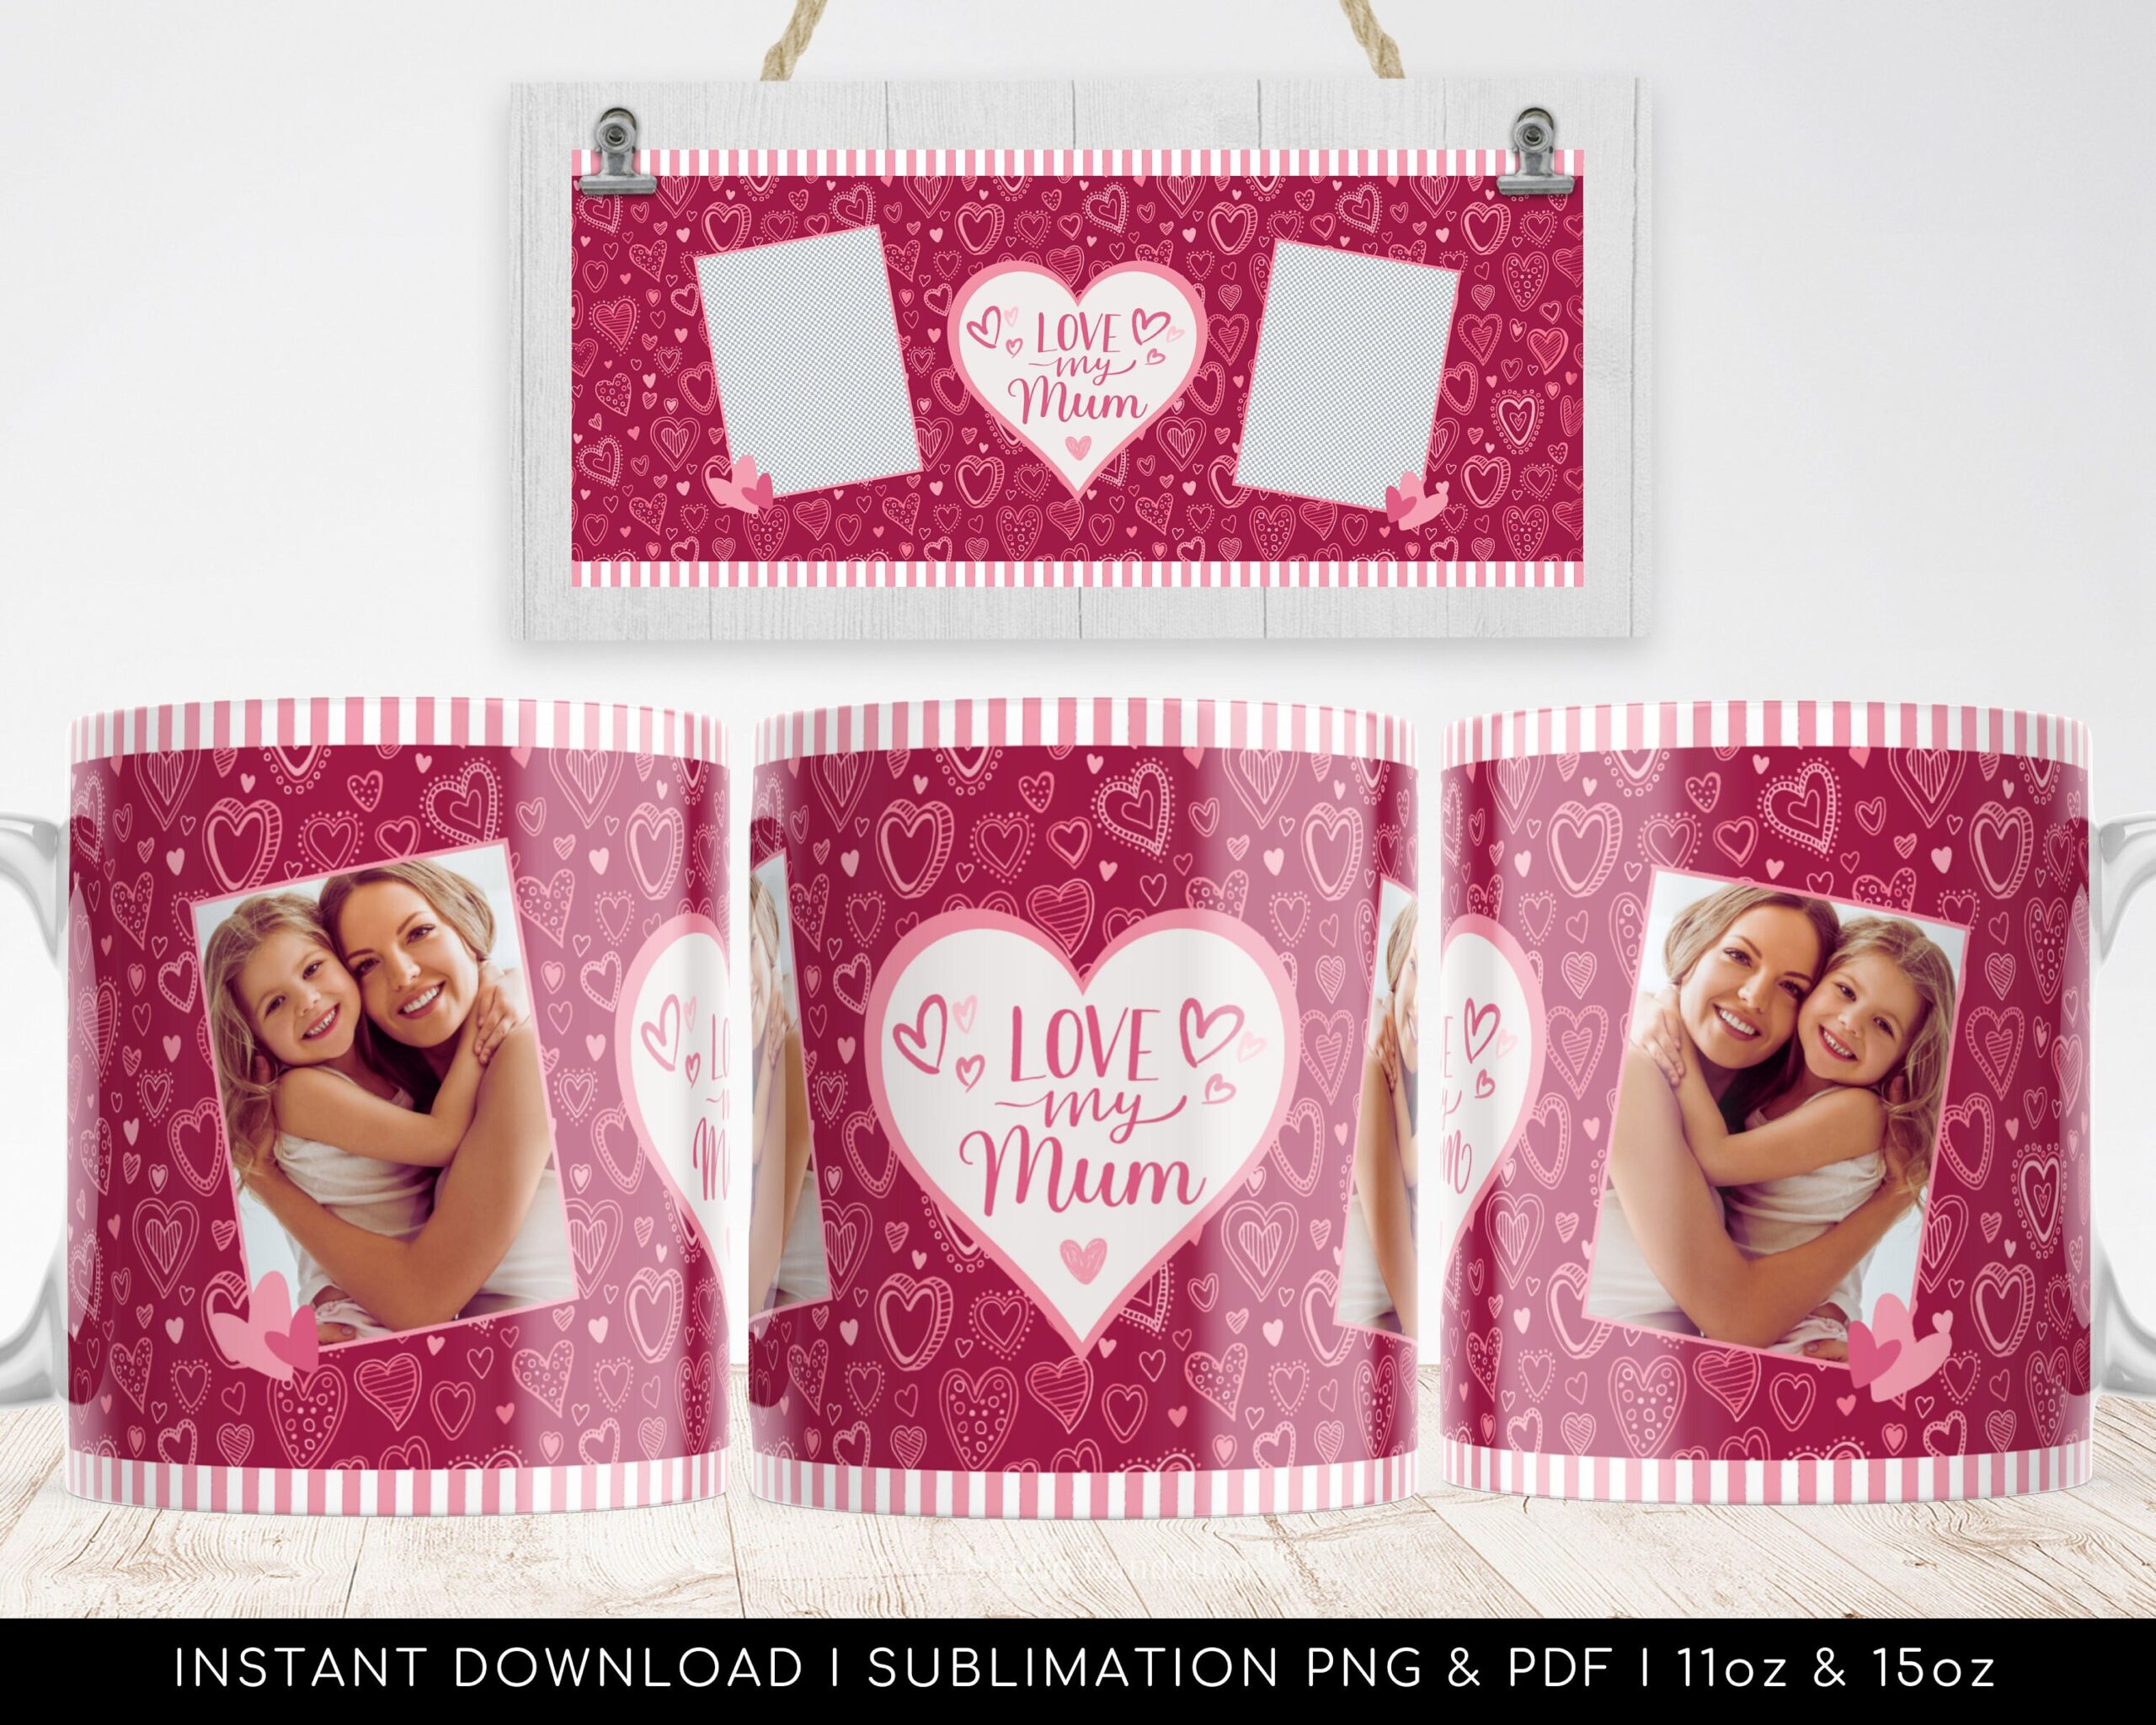 Love My Mum! Heart Photo Mug, Pink Heart Pattern, British Mother's Day, Sublimation file, Heart Photo Template, 11oz, 15oz png, pdf